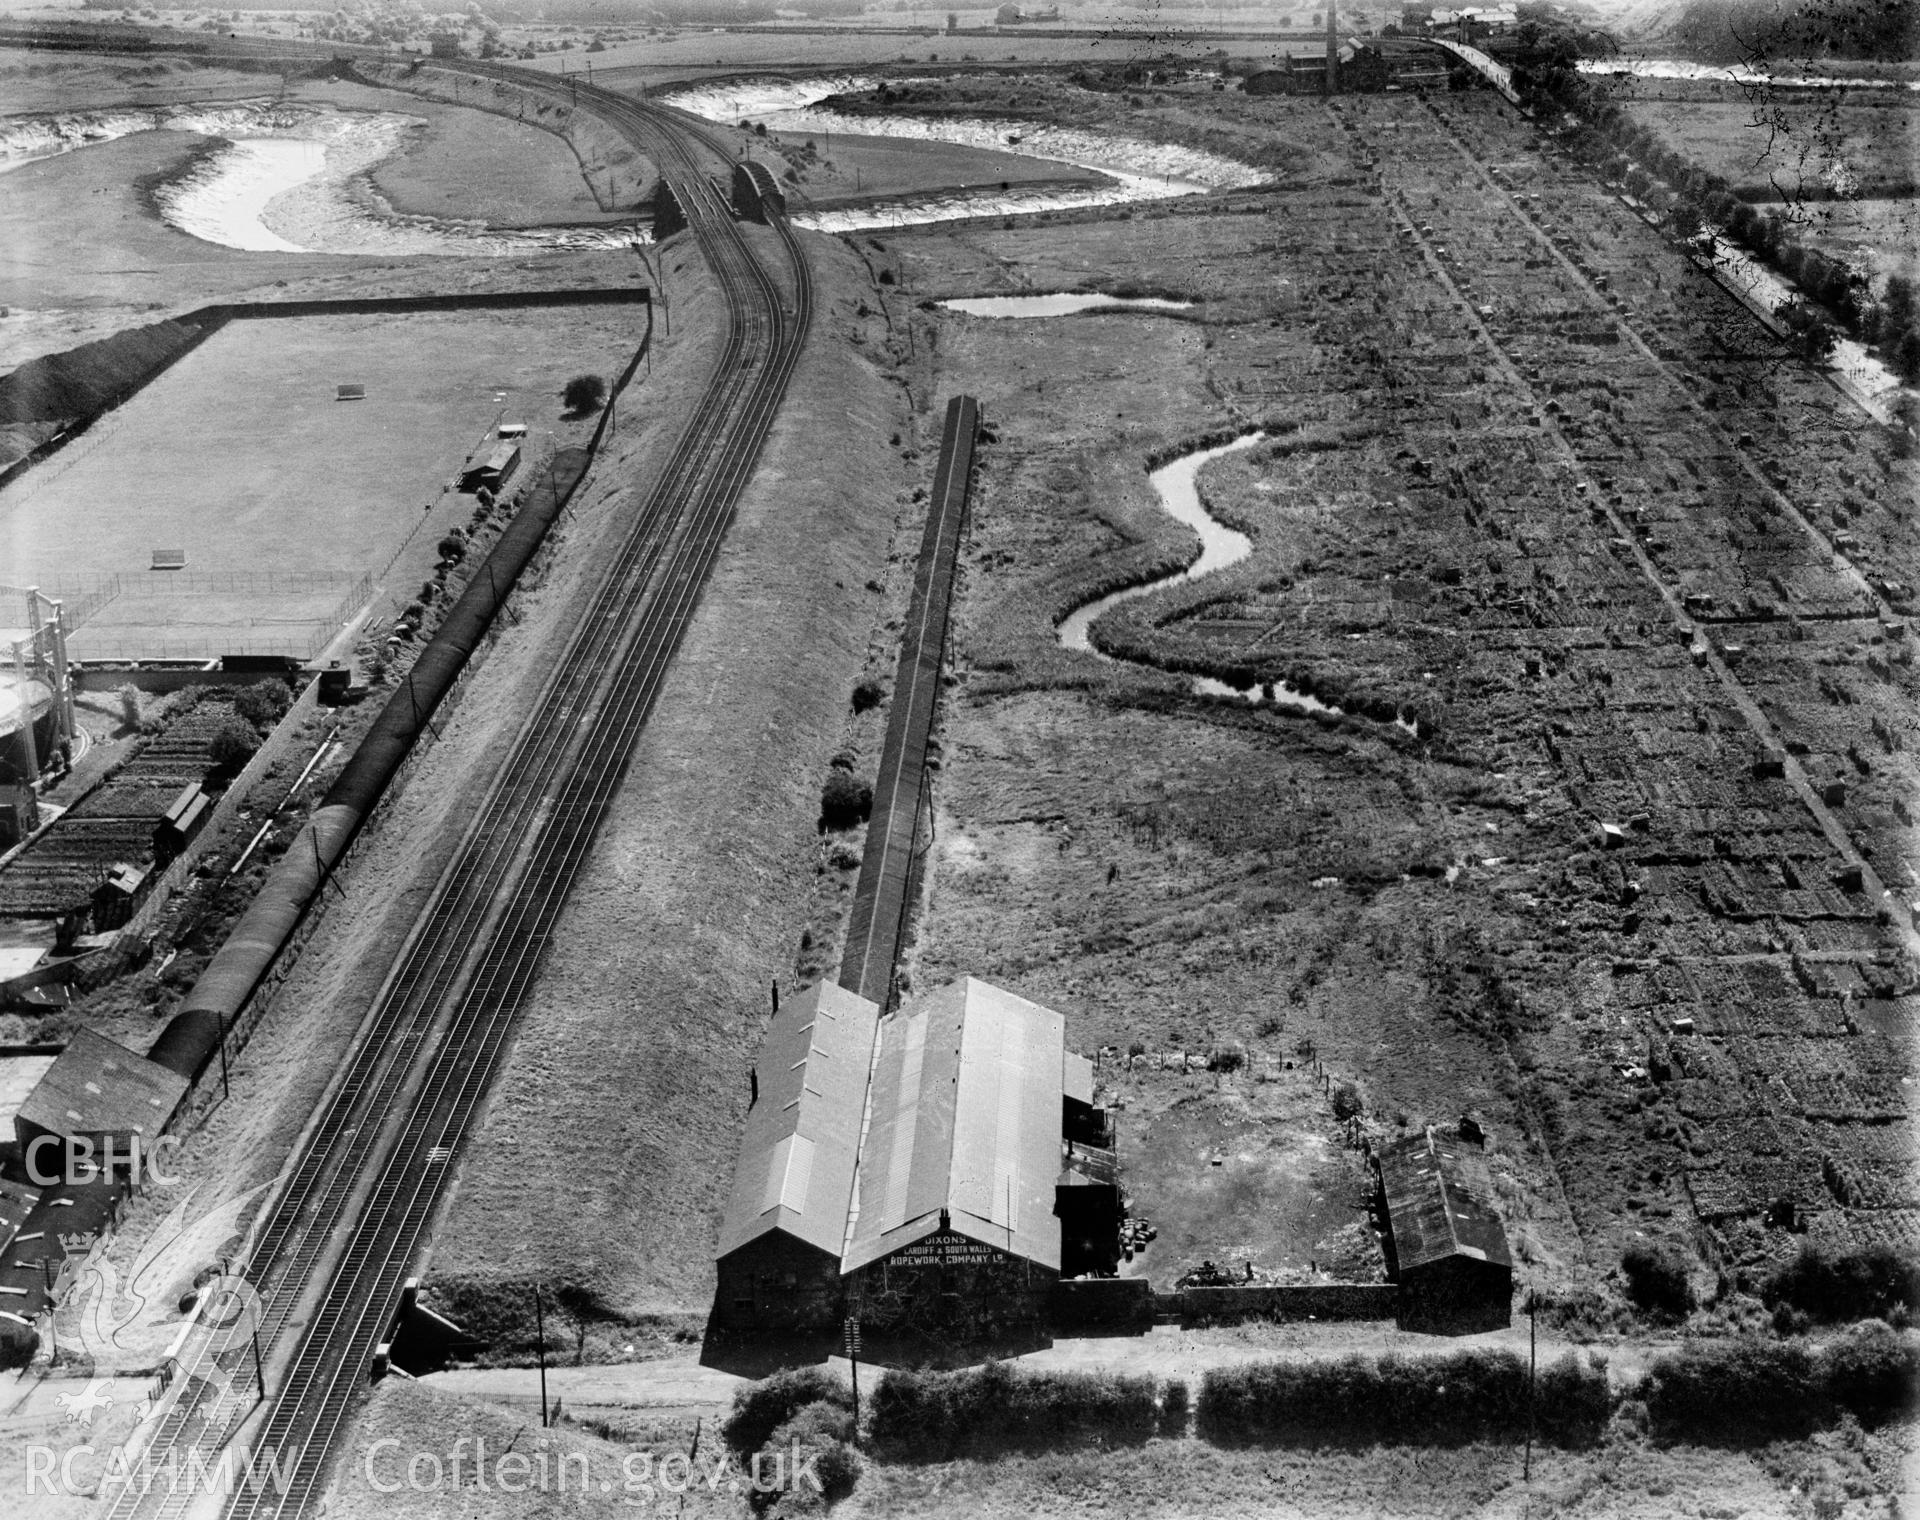 View of Dixon's Ropeworks, Grangetown, oblique aerial view. 5?x4? black and white glass plate negative.